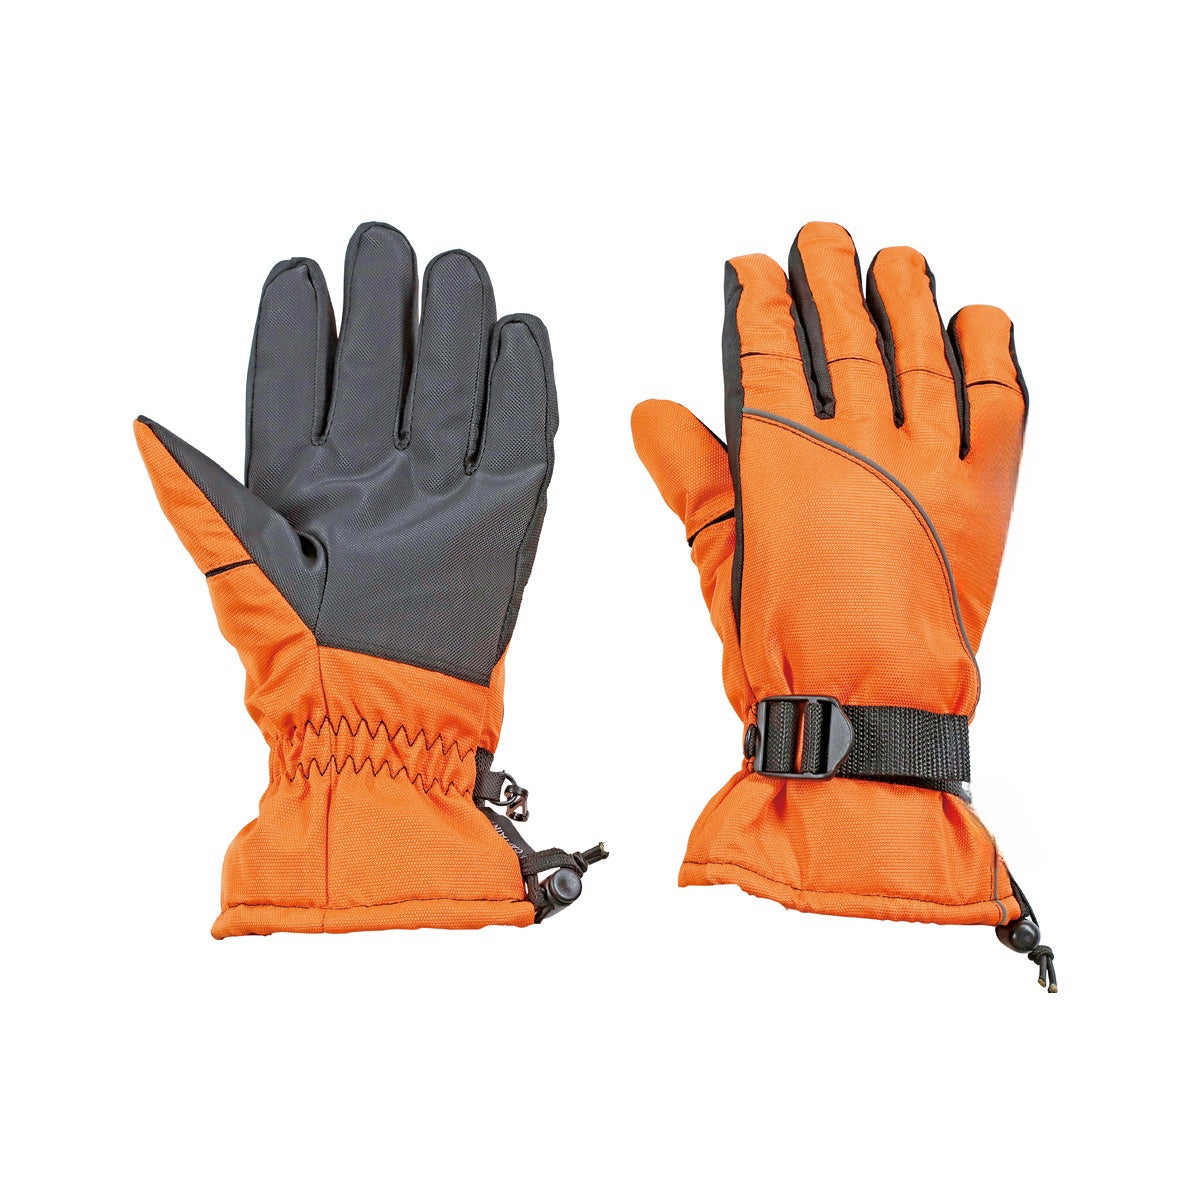 Waterproof/cold protection gloves 3D - EA1196